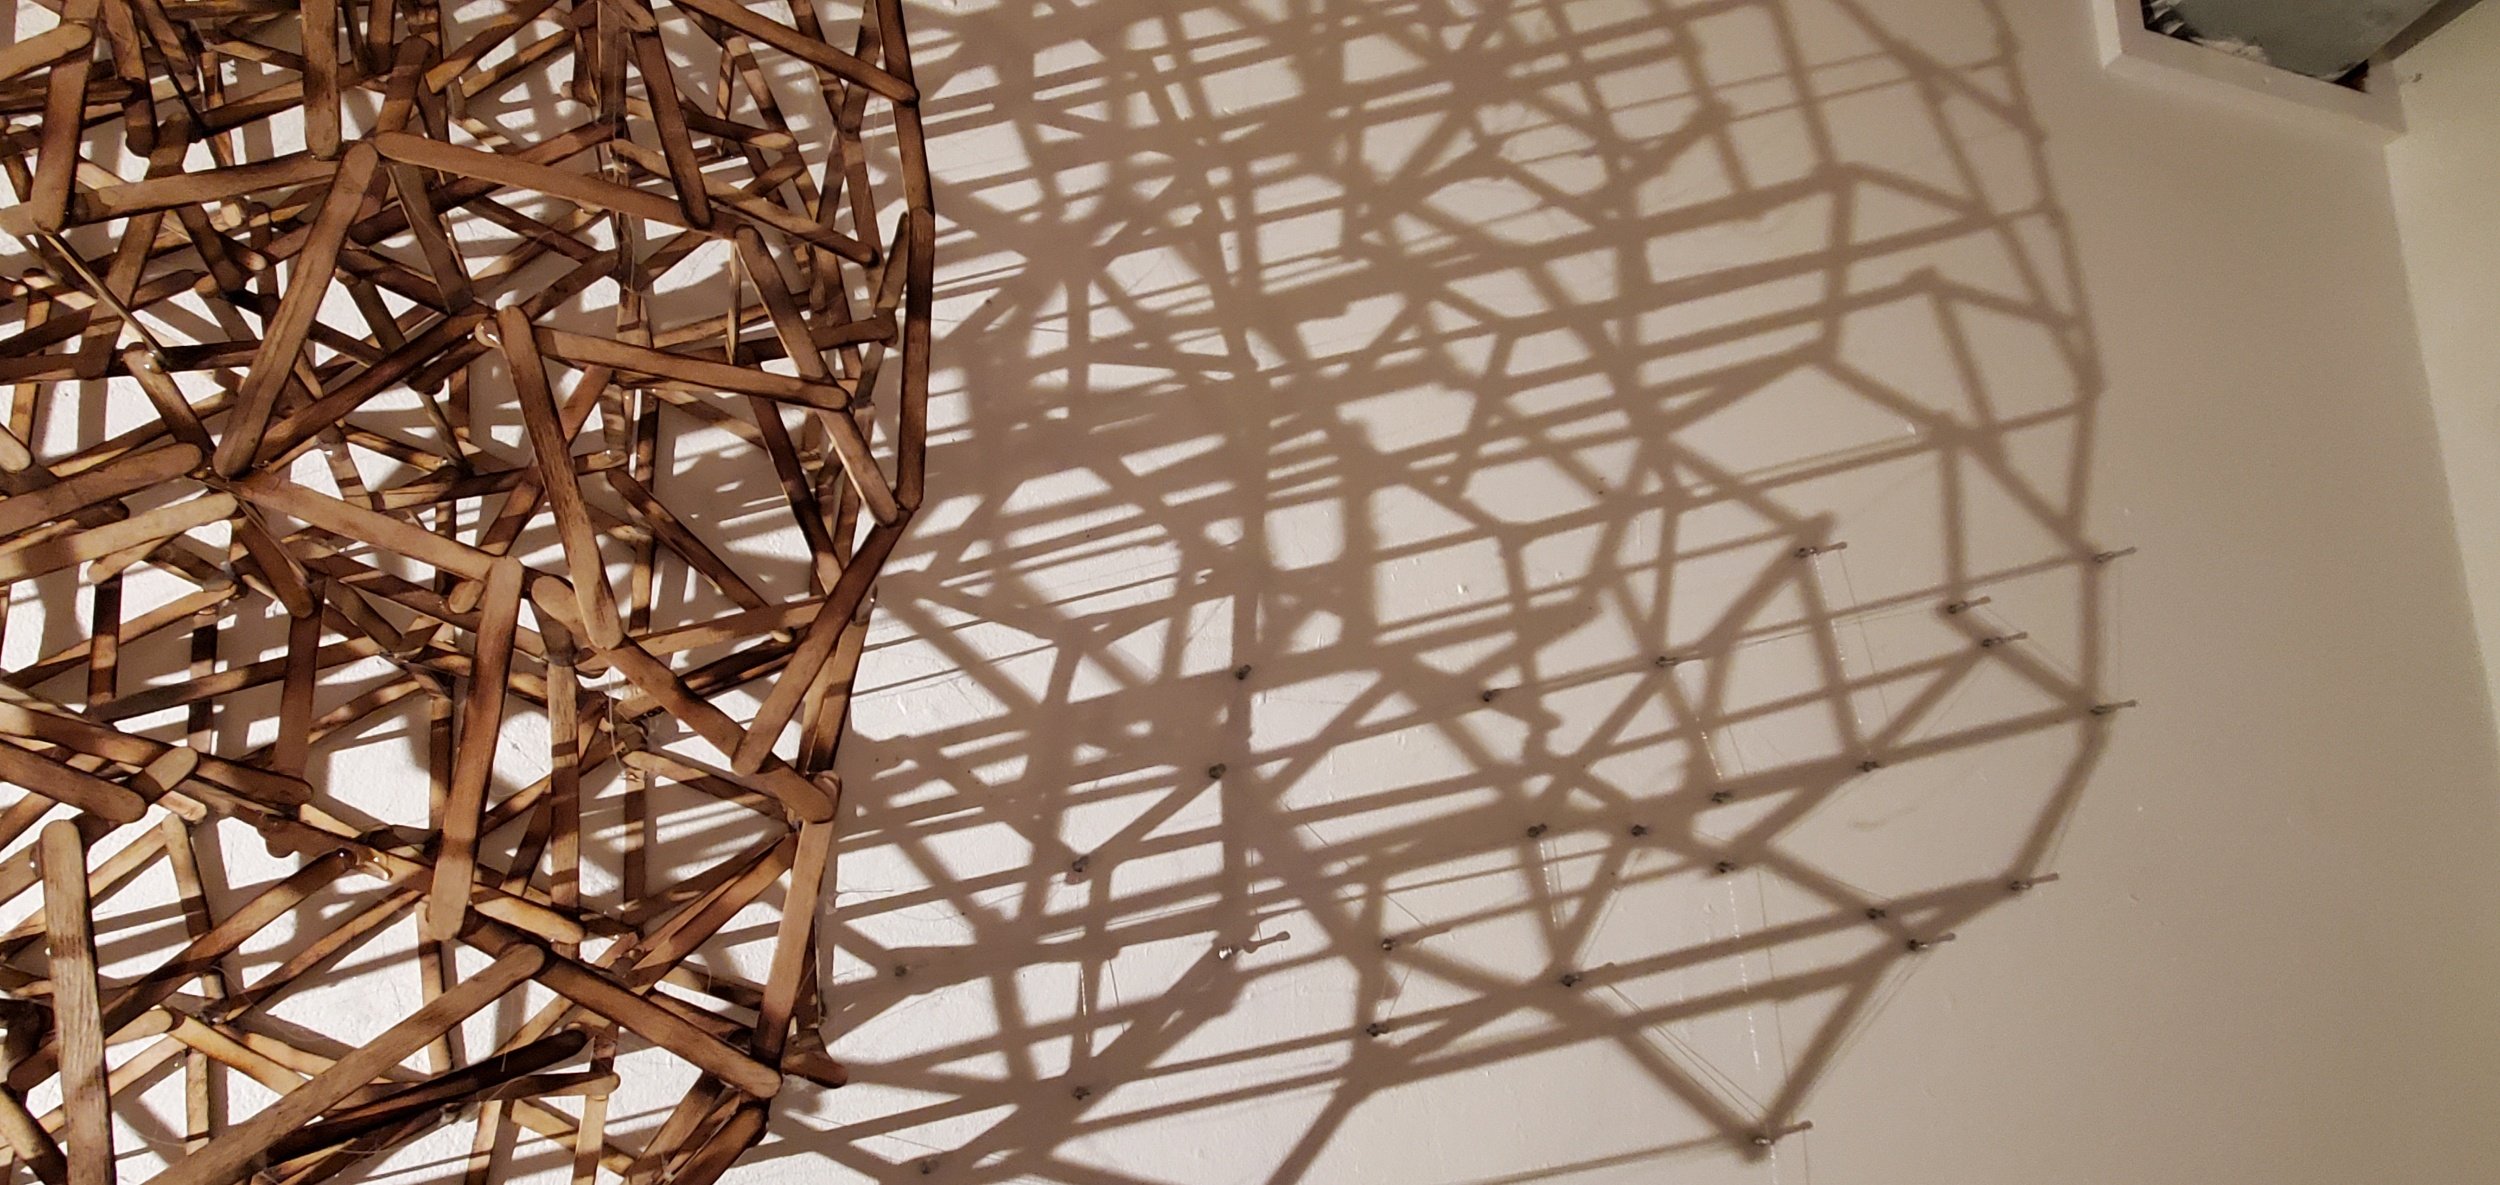 mapping her heartbeat, popsicle sticks, hot glue, shadow, thread, push pins, 32"x40"x10"d (detail)